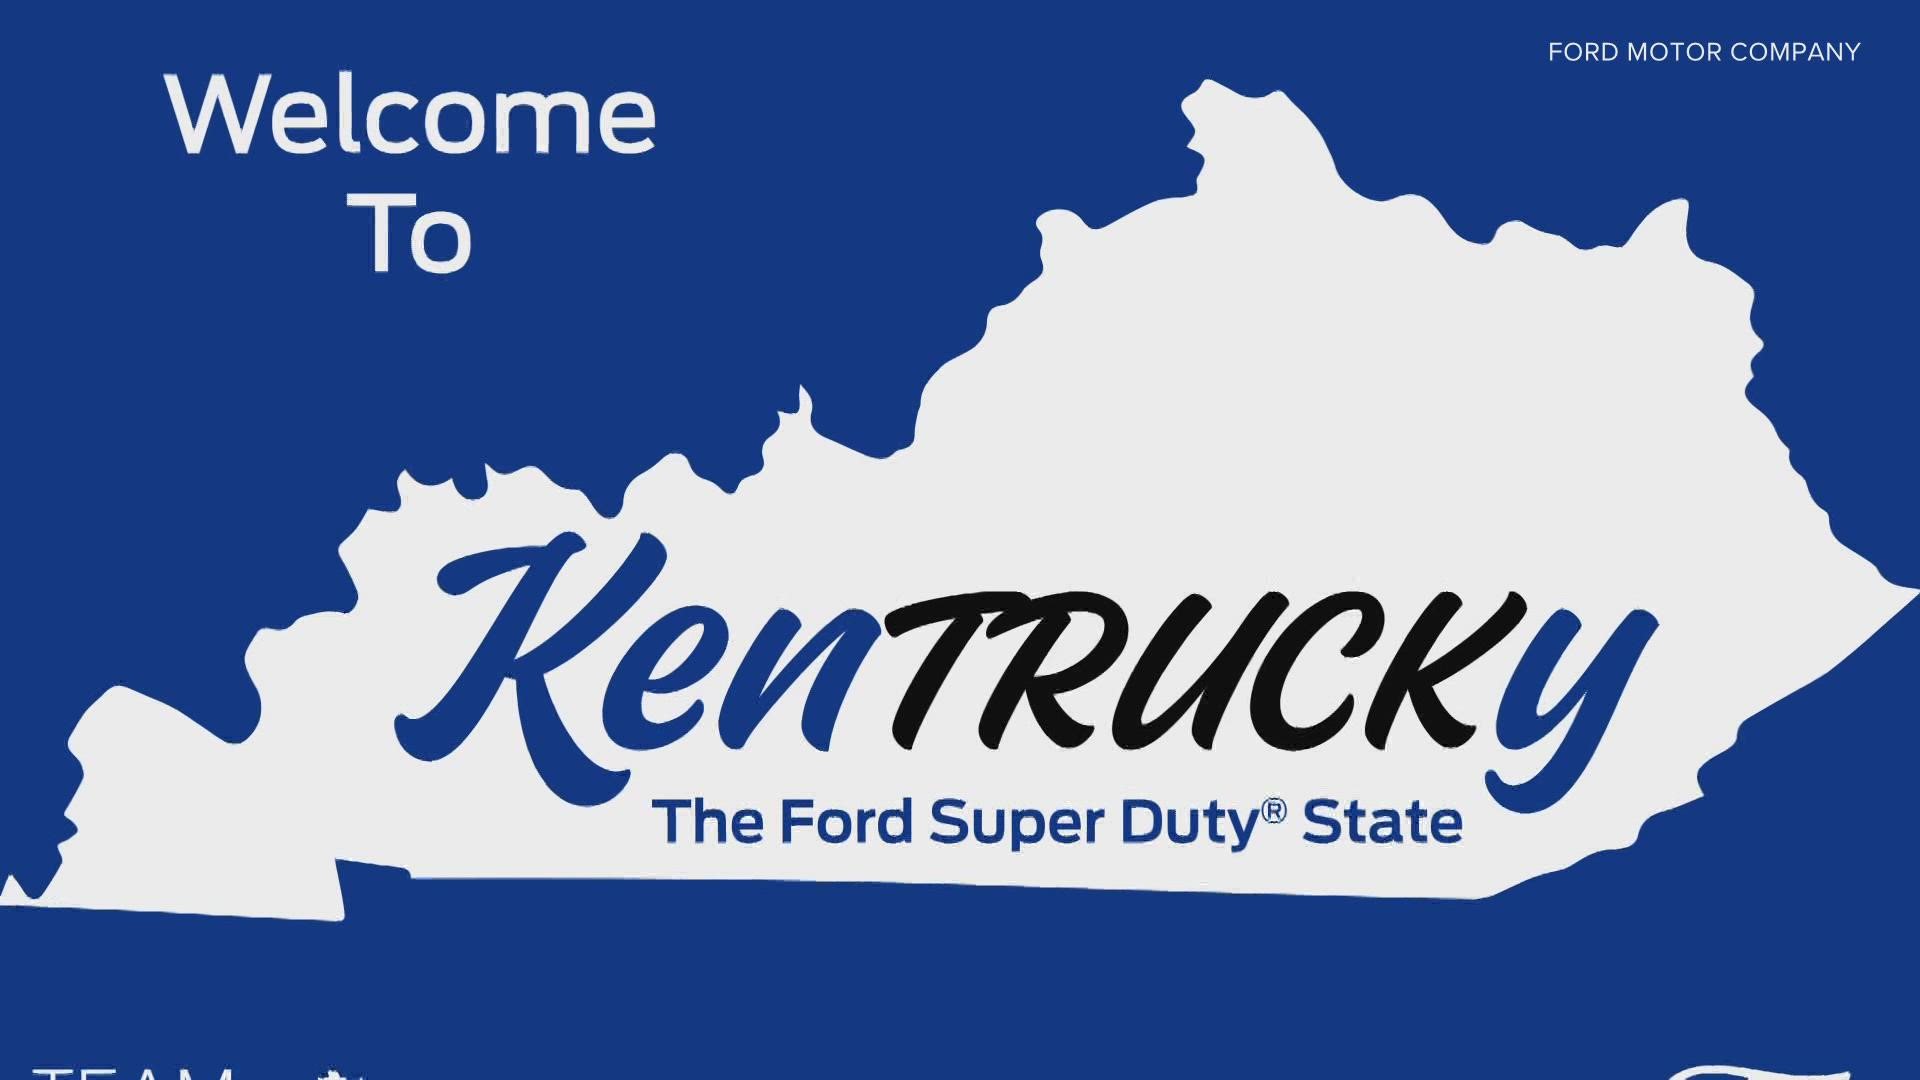 Ford will unveil a new truck model Sept. 27 at Churchill Downs.